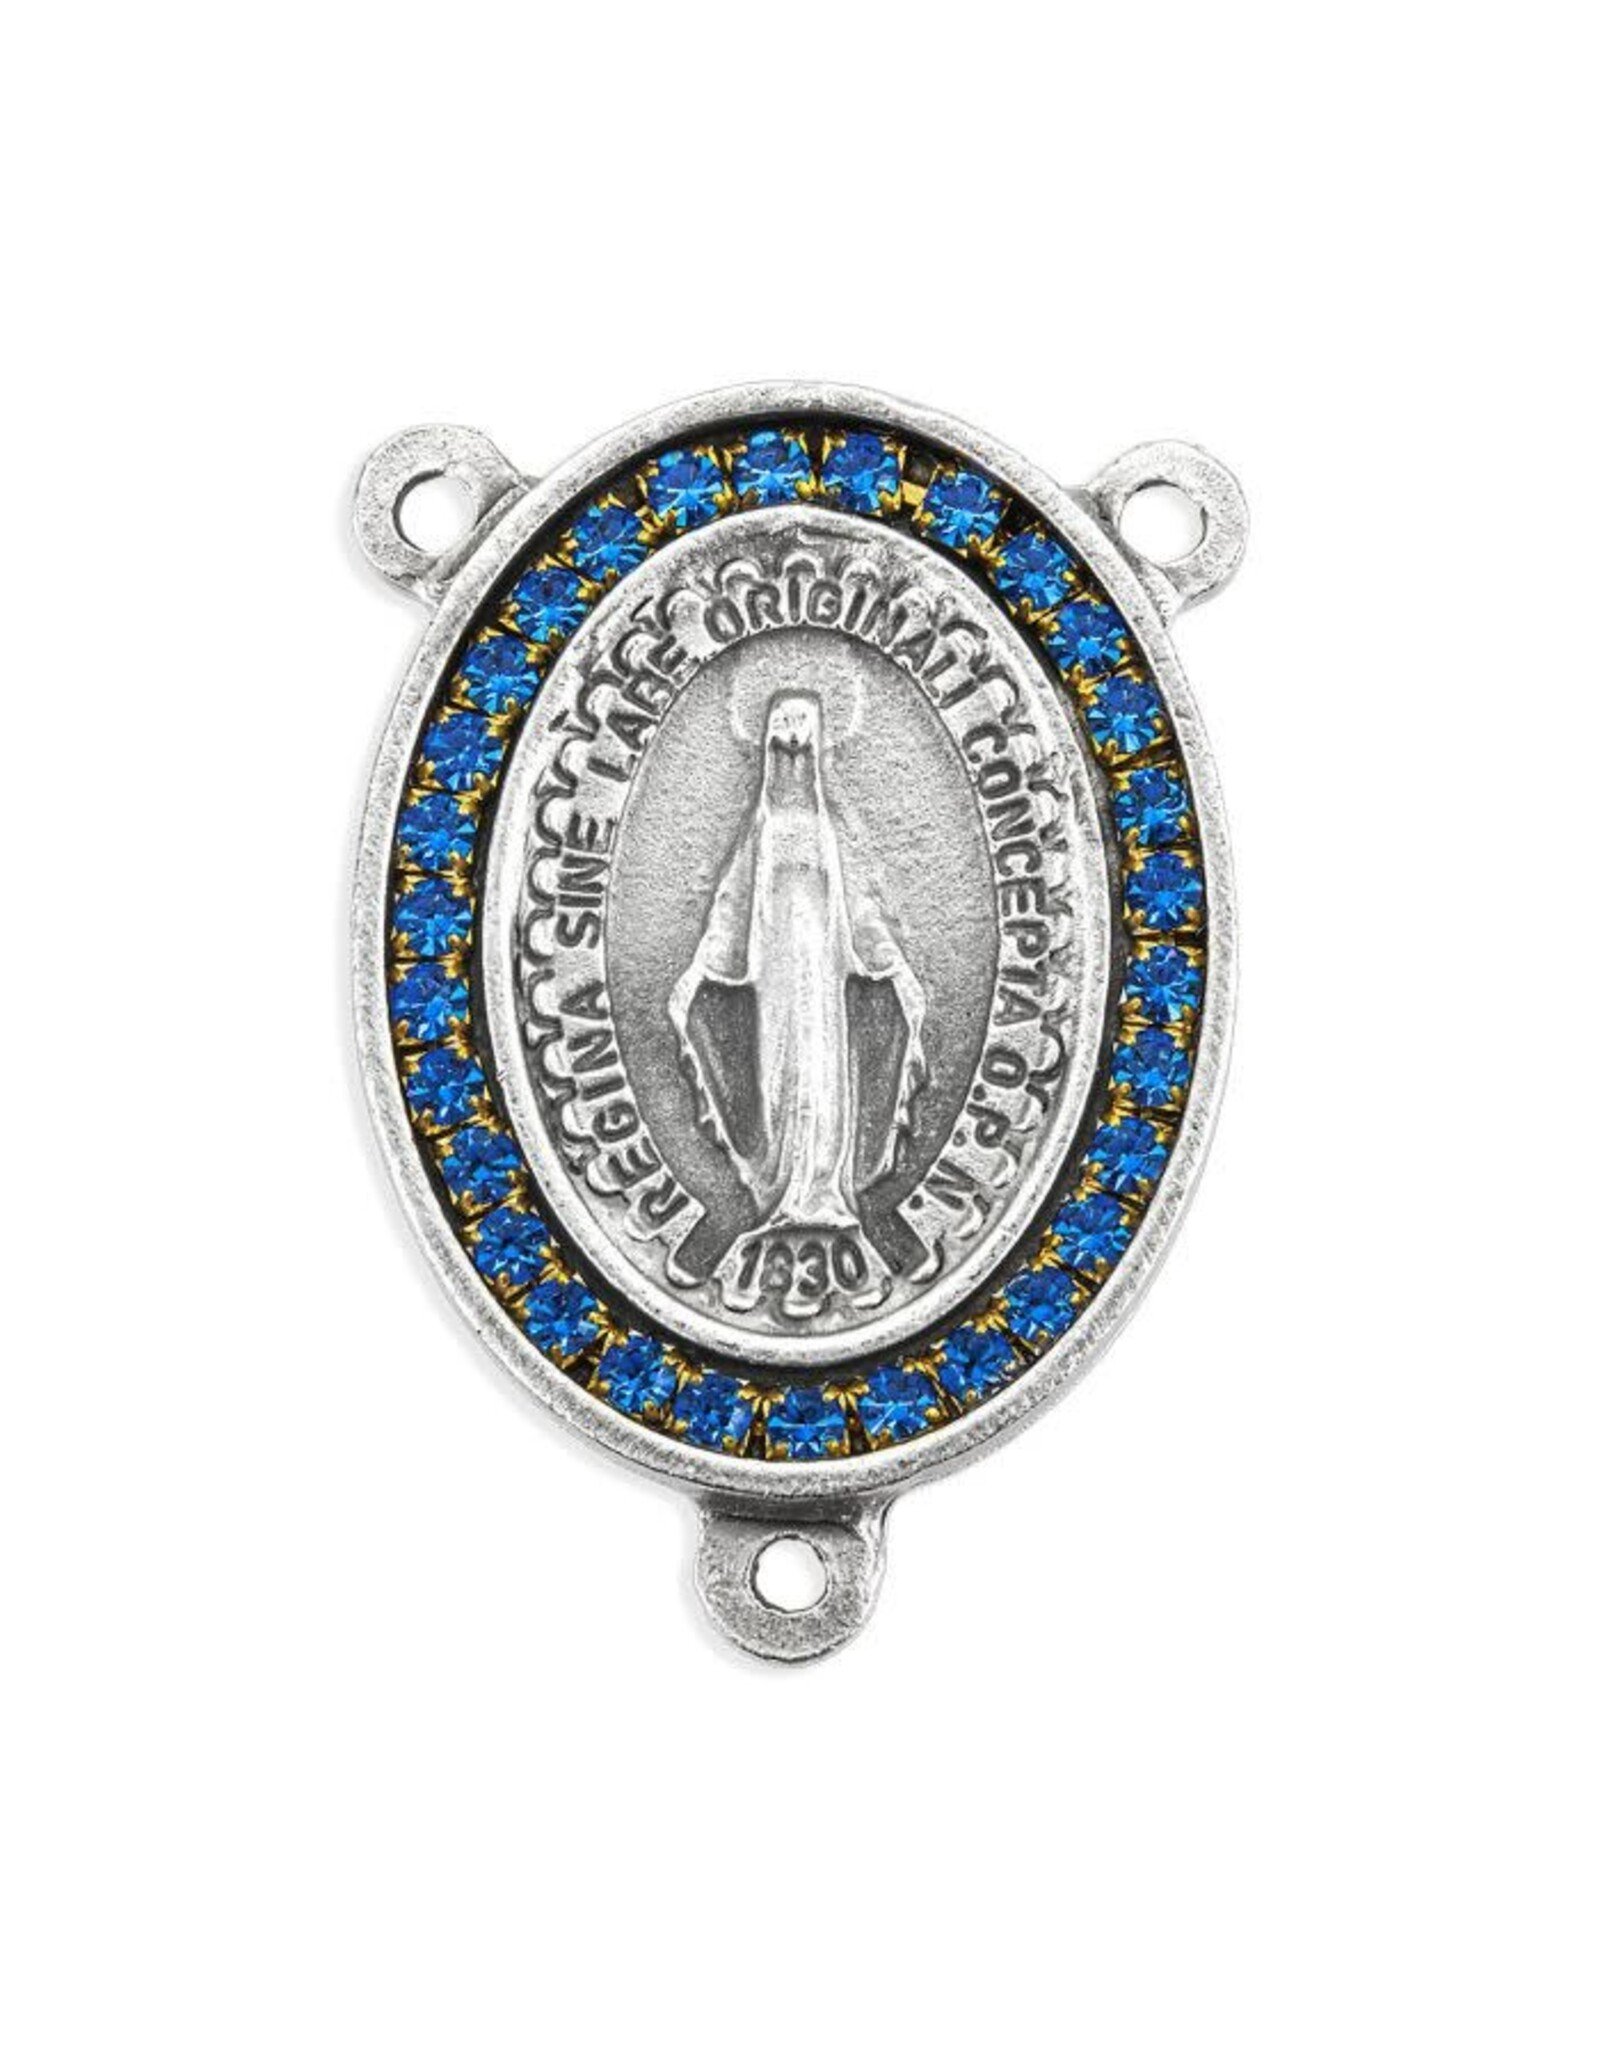 Hirten Rosary Centerpiece - Large, Immaculate Conception with Blue Crystals